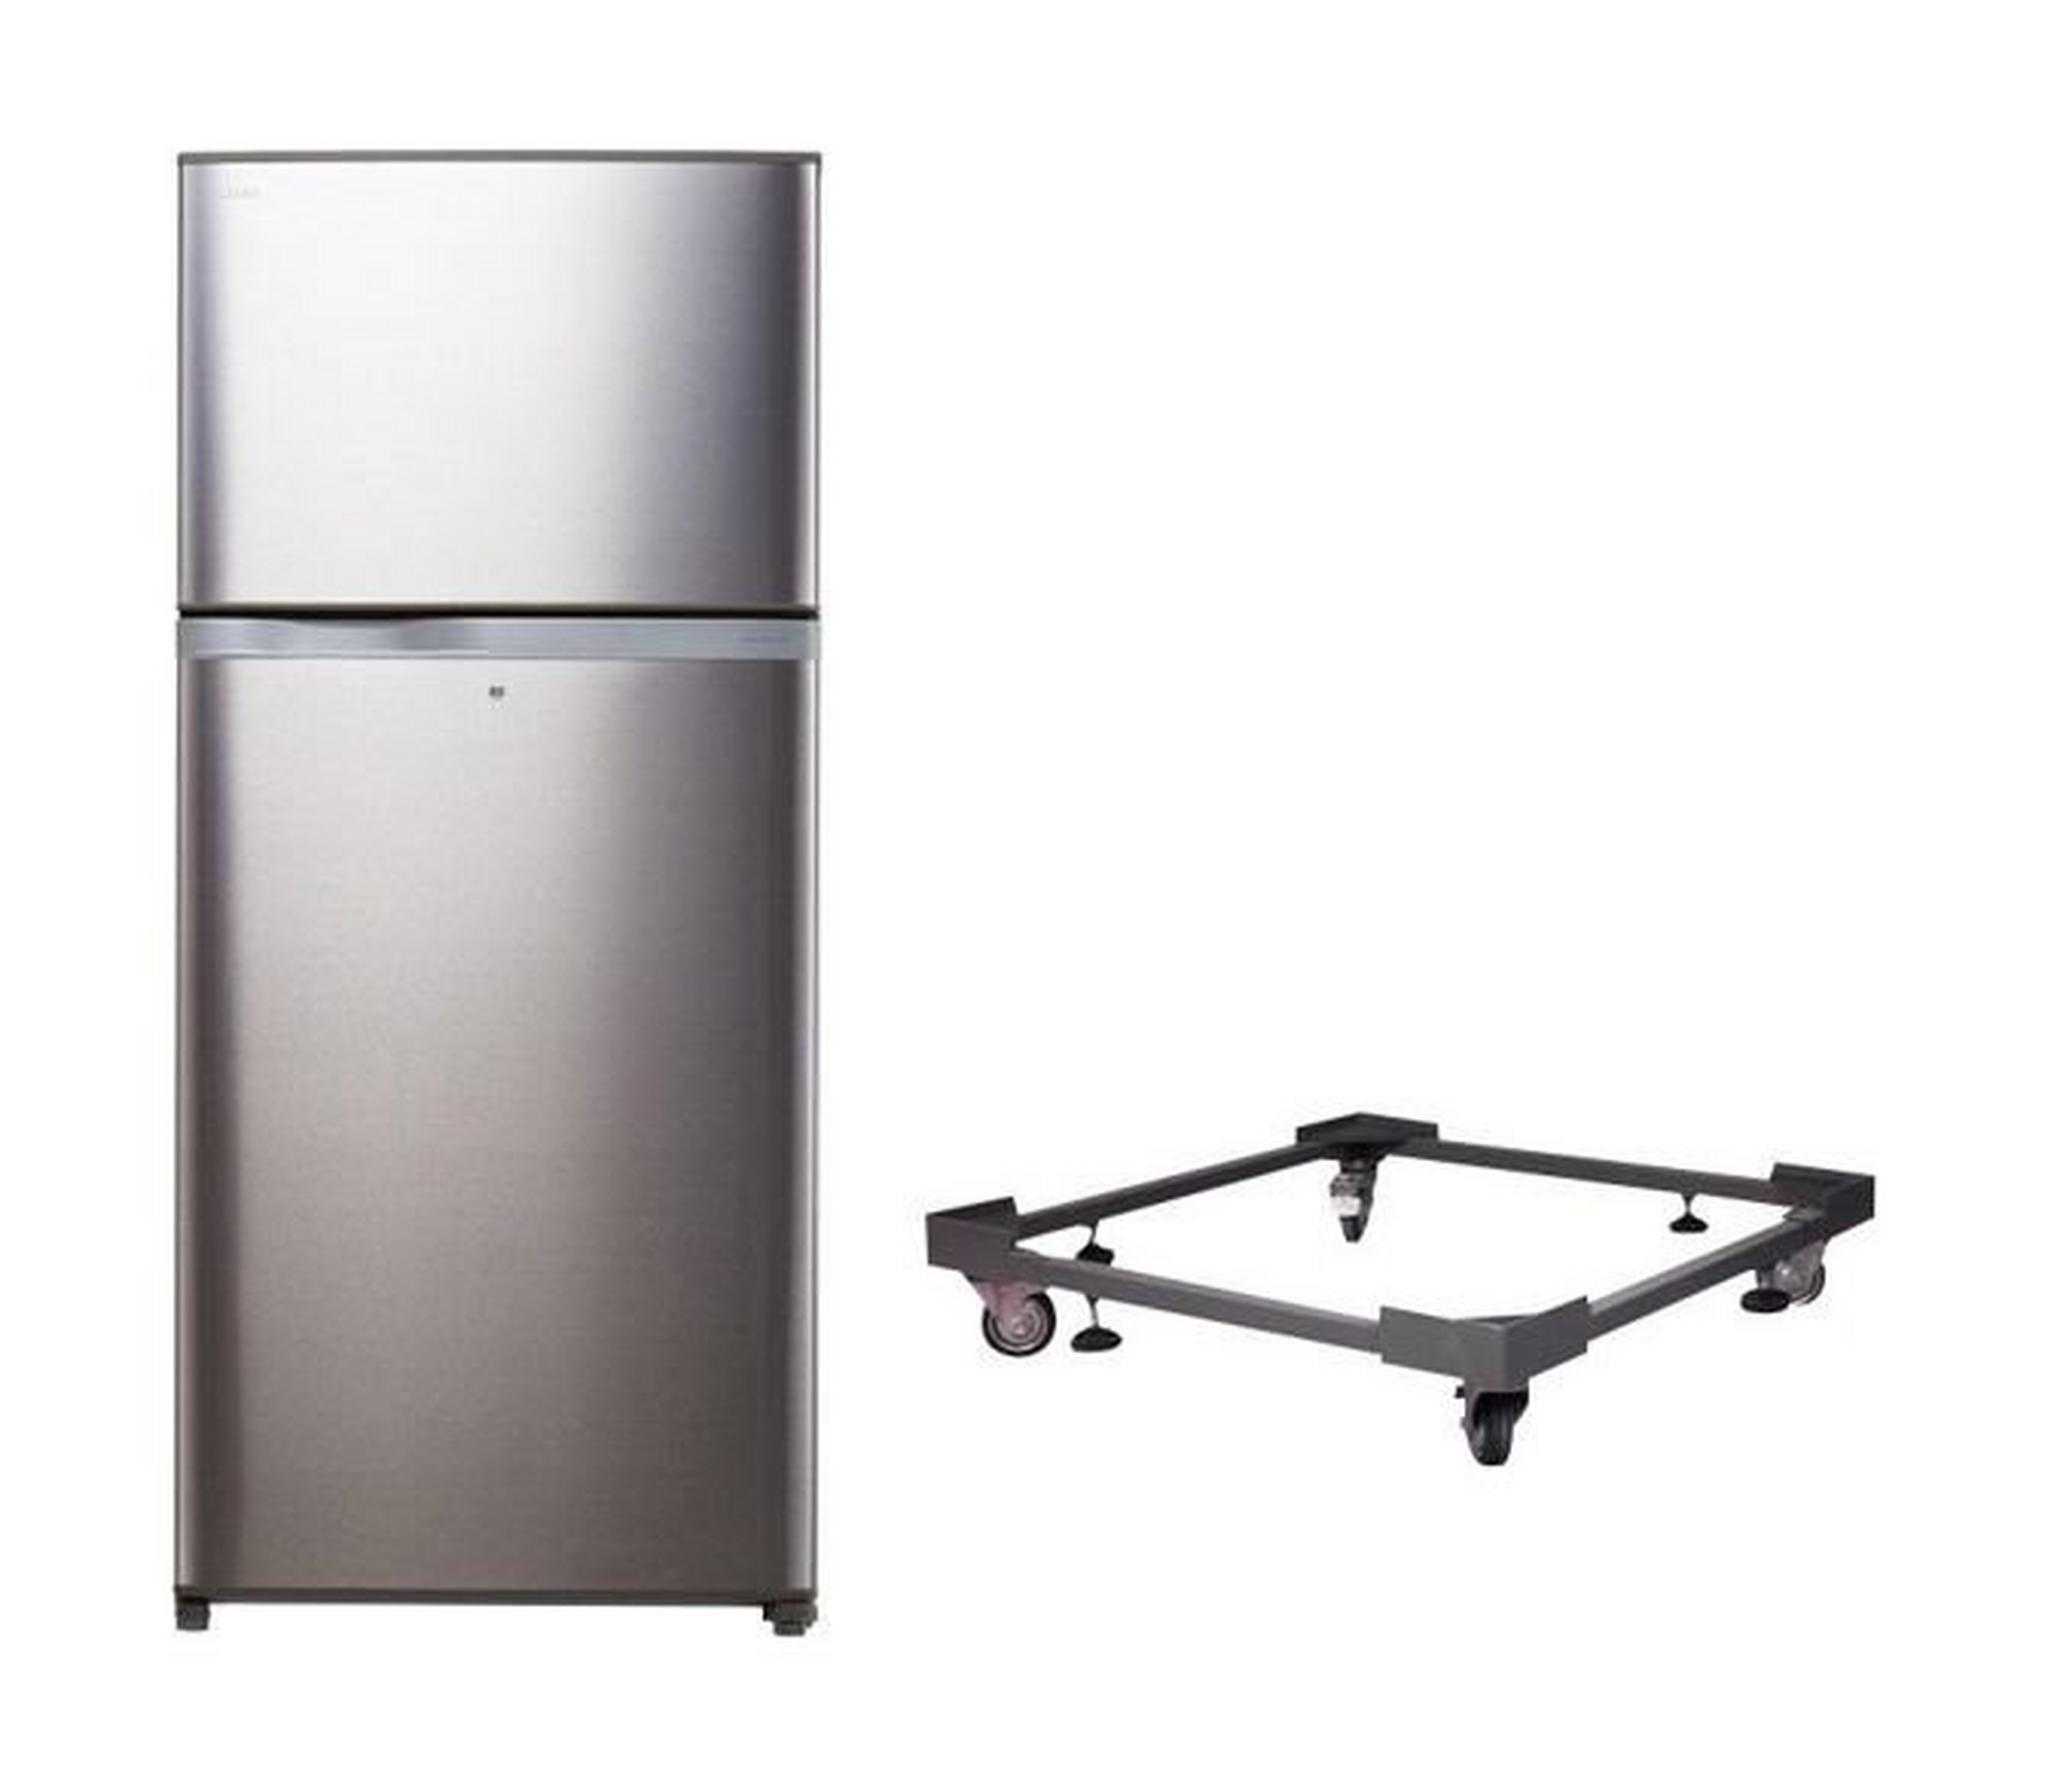 Toshiba Inverter 25 Cft. Top Mount Refrigerator + Stand For Refrigerator With Large Wheels